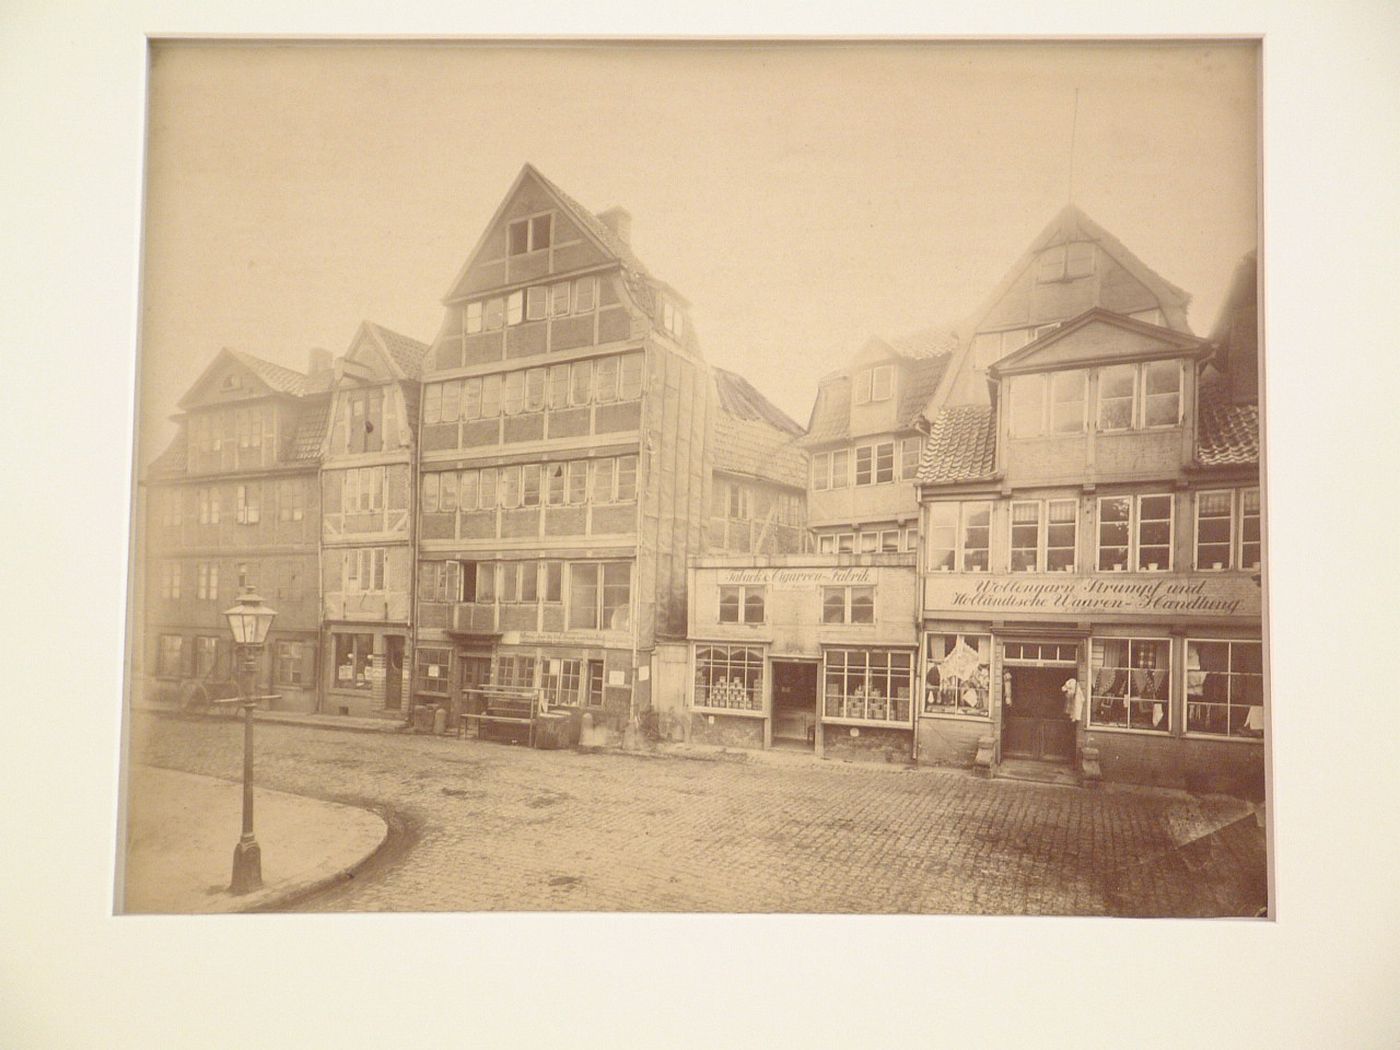 View of businesses and residences on street, Hamburg, Germany